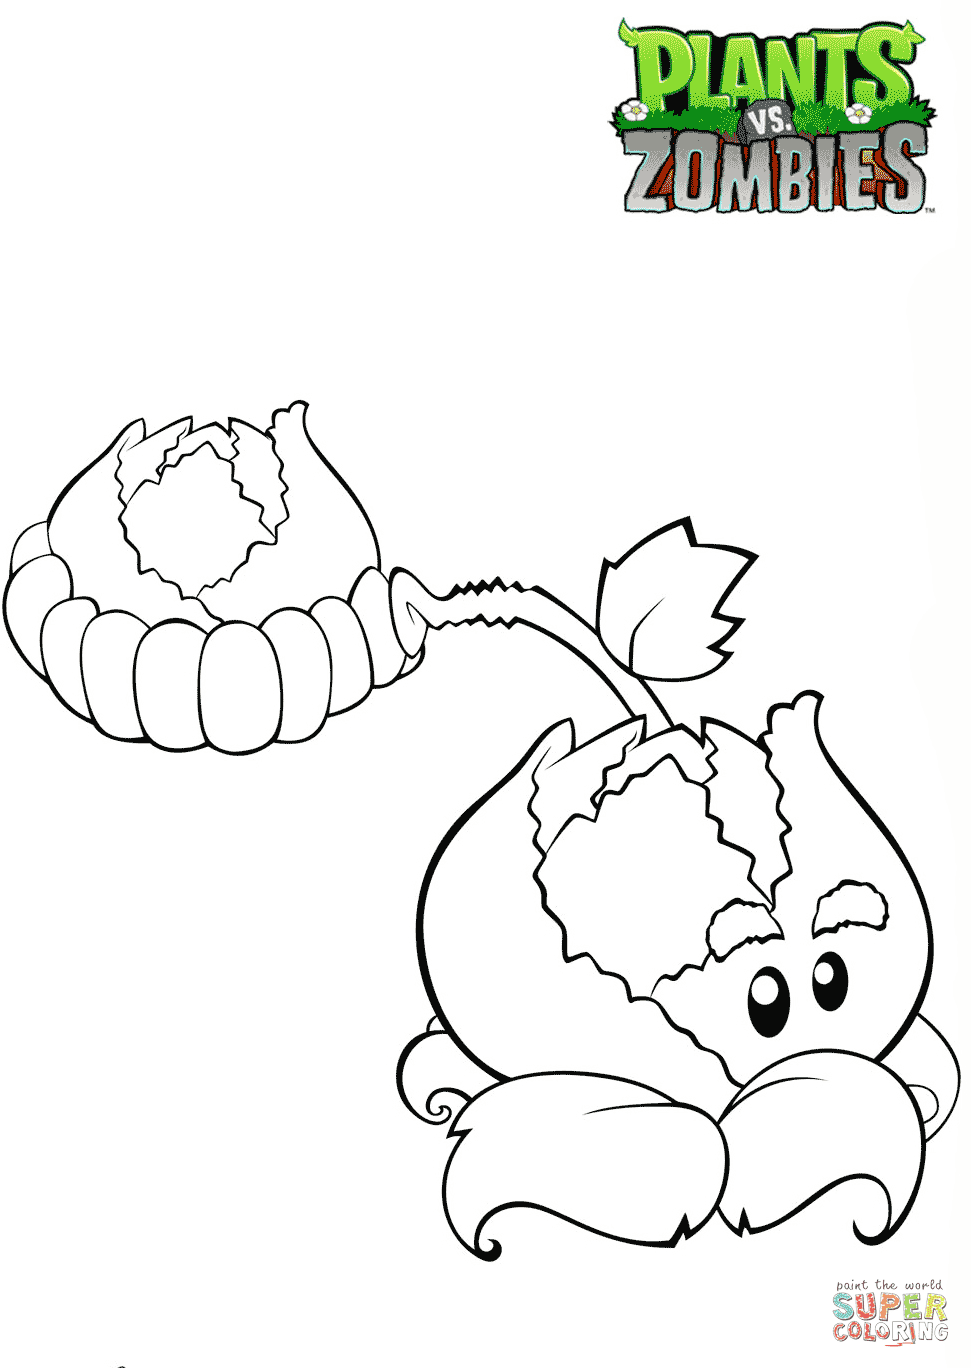 Plants vs. Zombies Cabbage Pult coloring page | Free ...